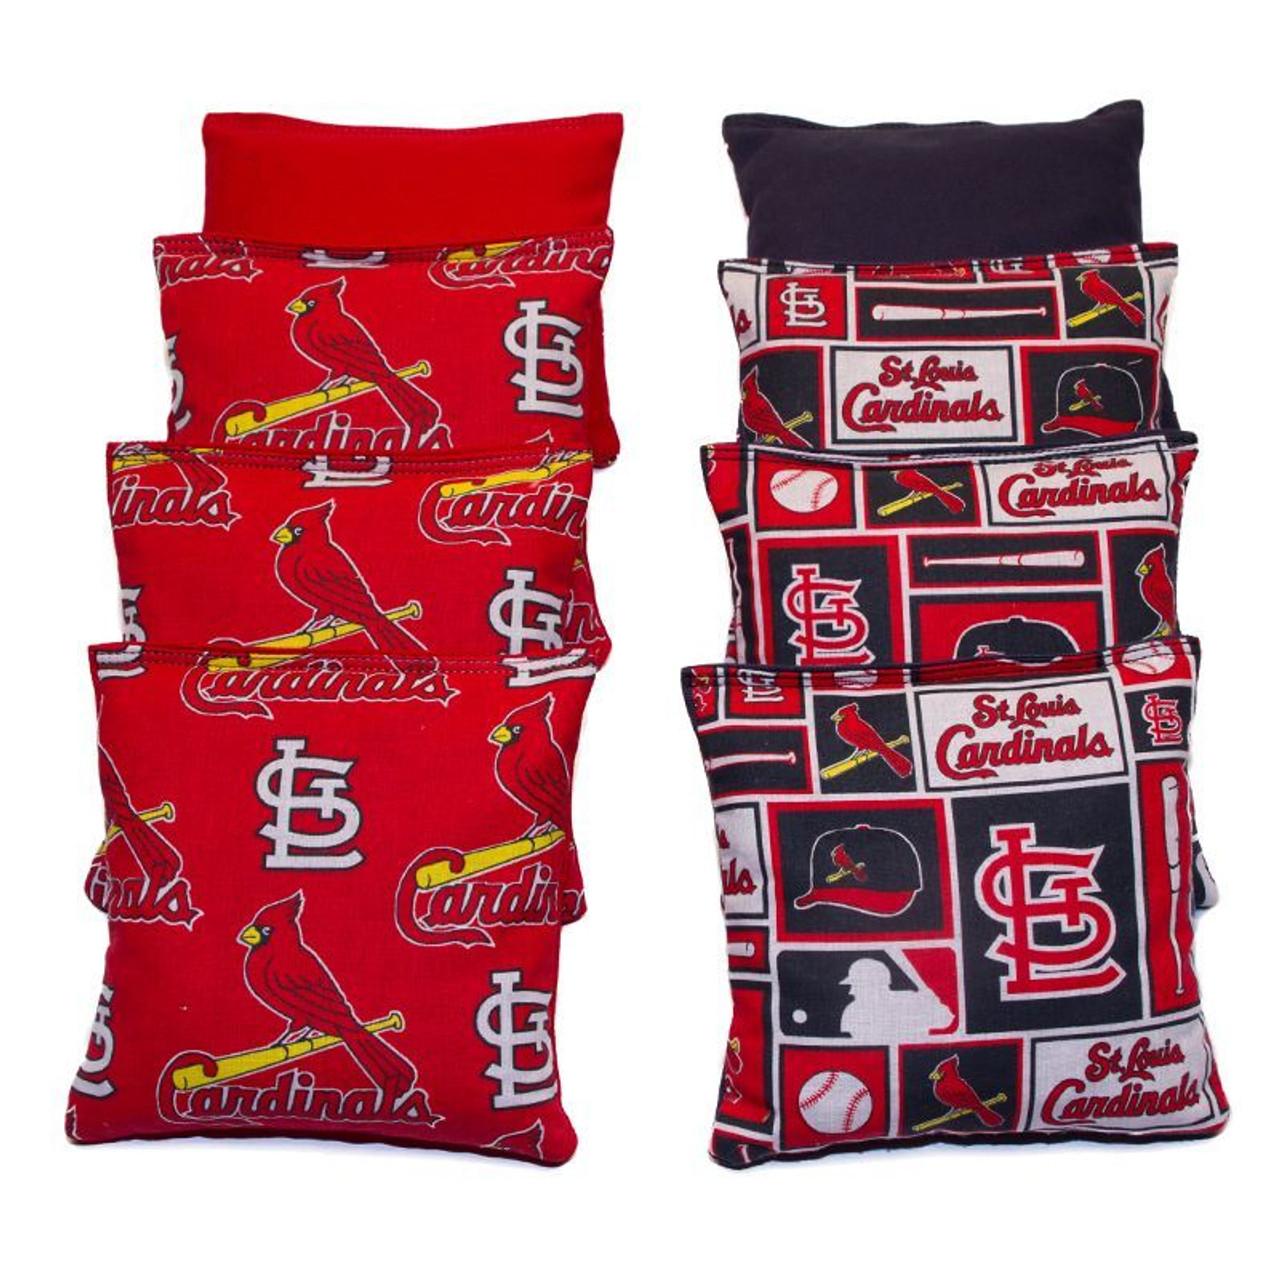 Wild Sports St. Louis Cardinals 16 oz. Dual-Sided Bean Bags (8-Pack), Mulit-Colored